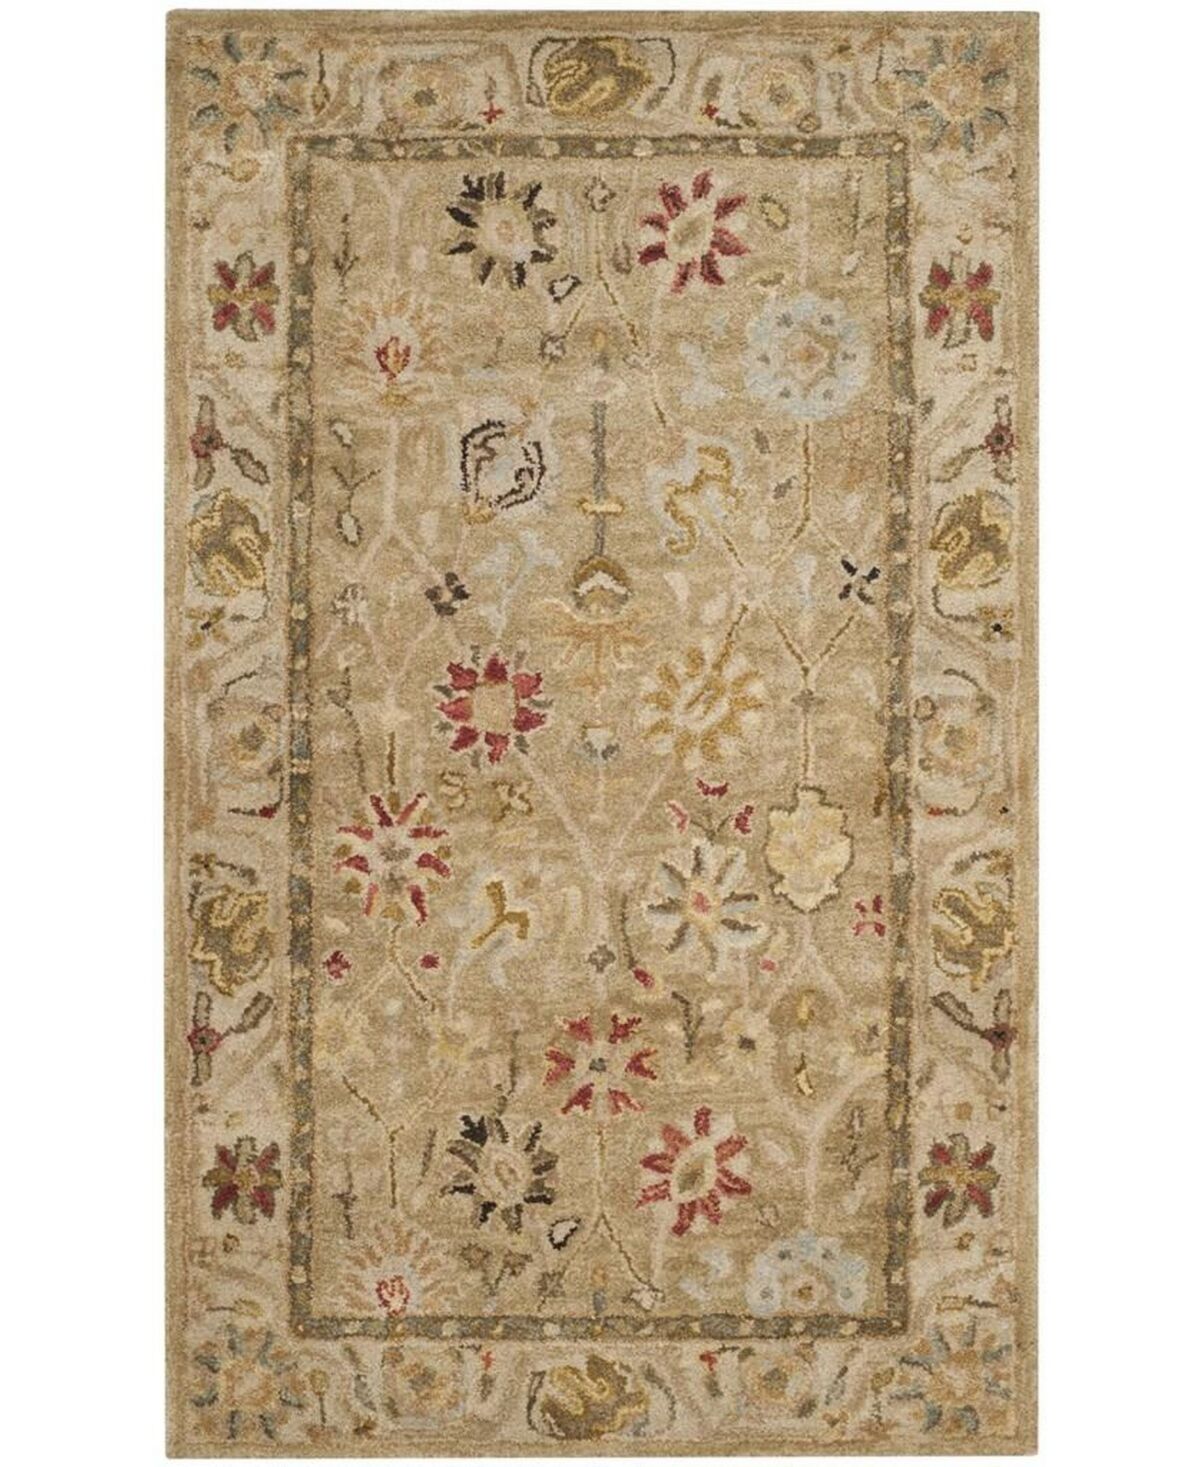 Safavieh Antiquity At859 Taupe 4' x 6' Area Rug - Taupe